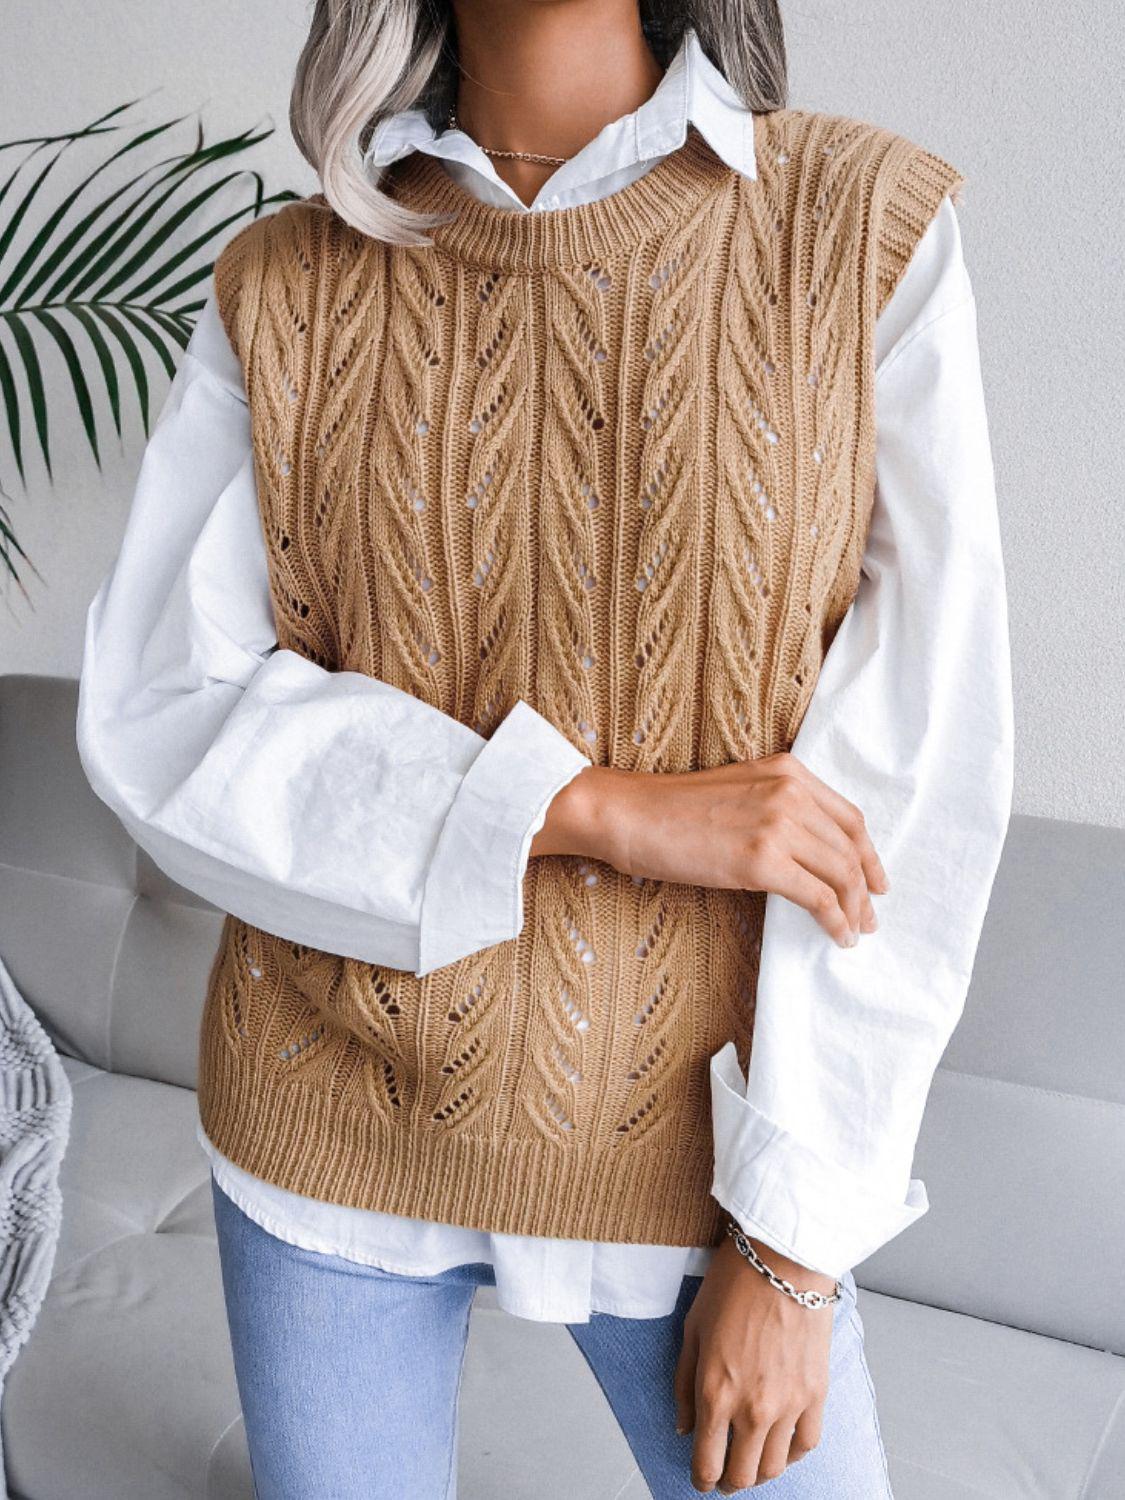 Round Neck Openwork Capped Sleeve Sweater Vest BLUE ZONE PLANET